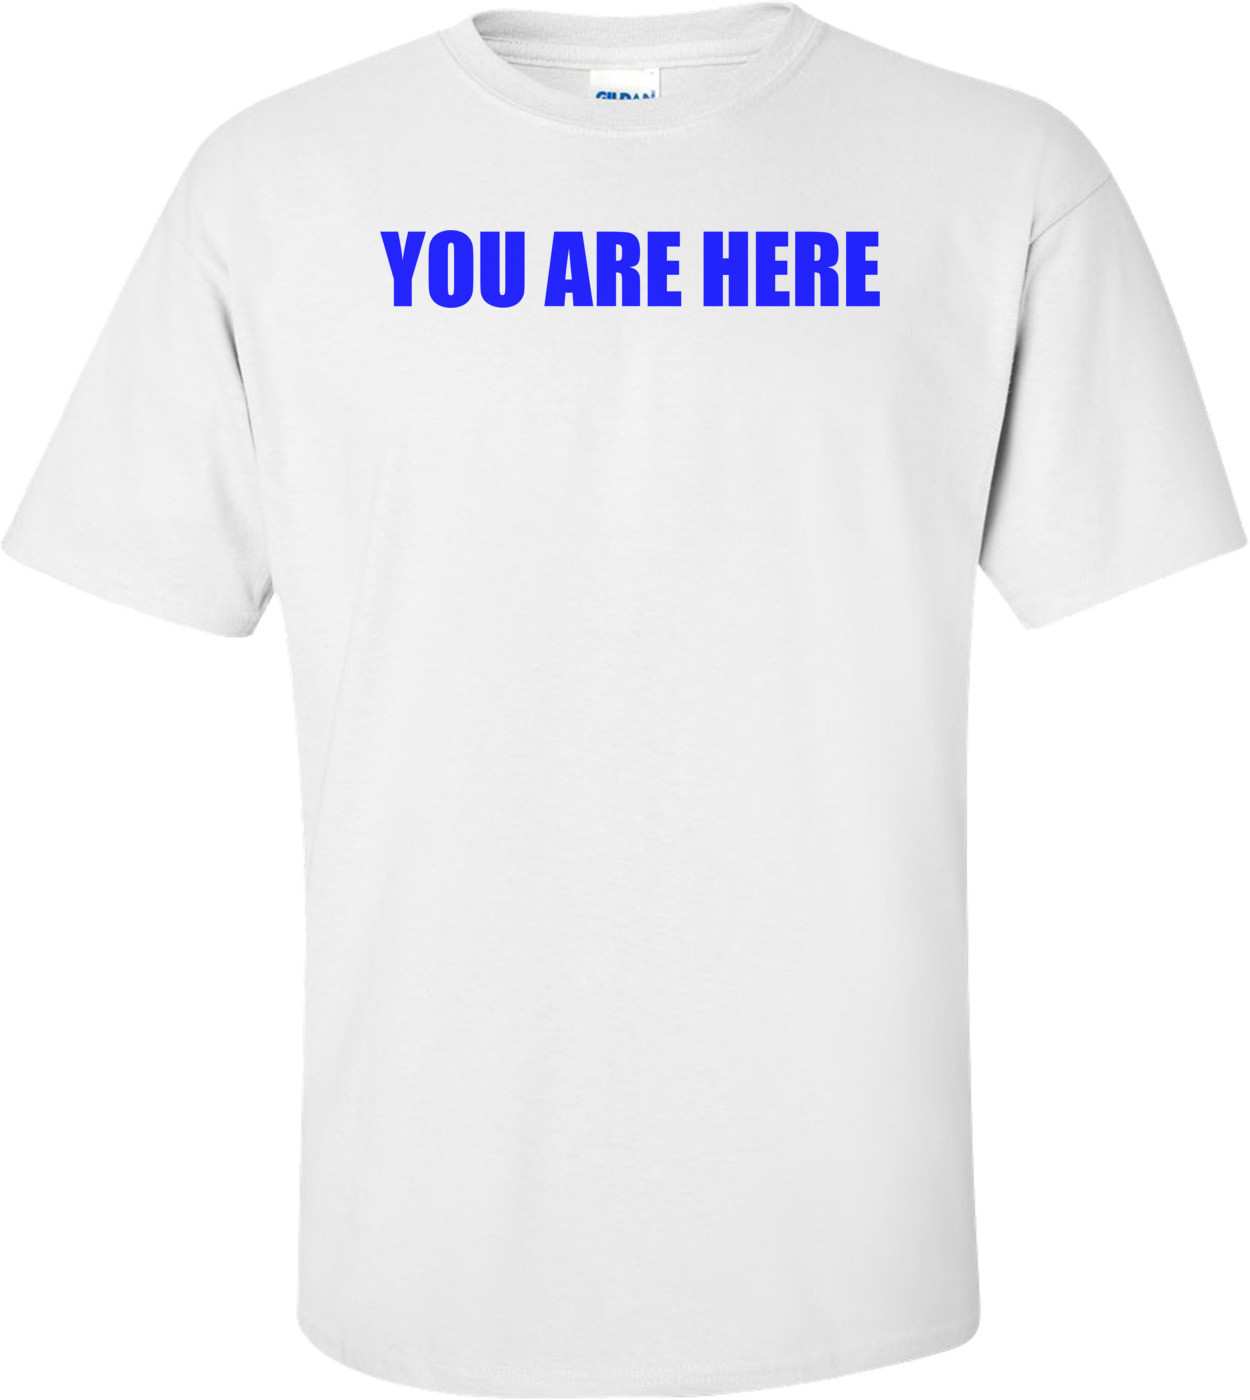 You are Here Shirt